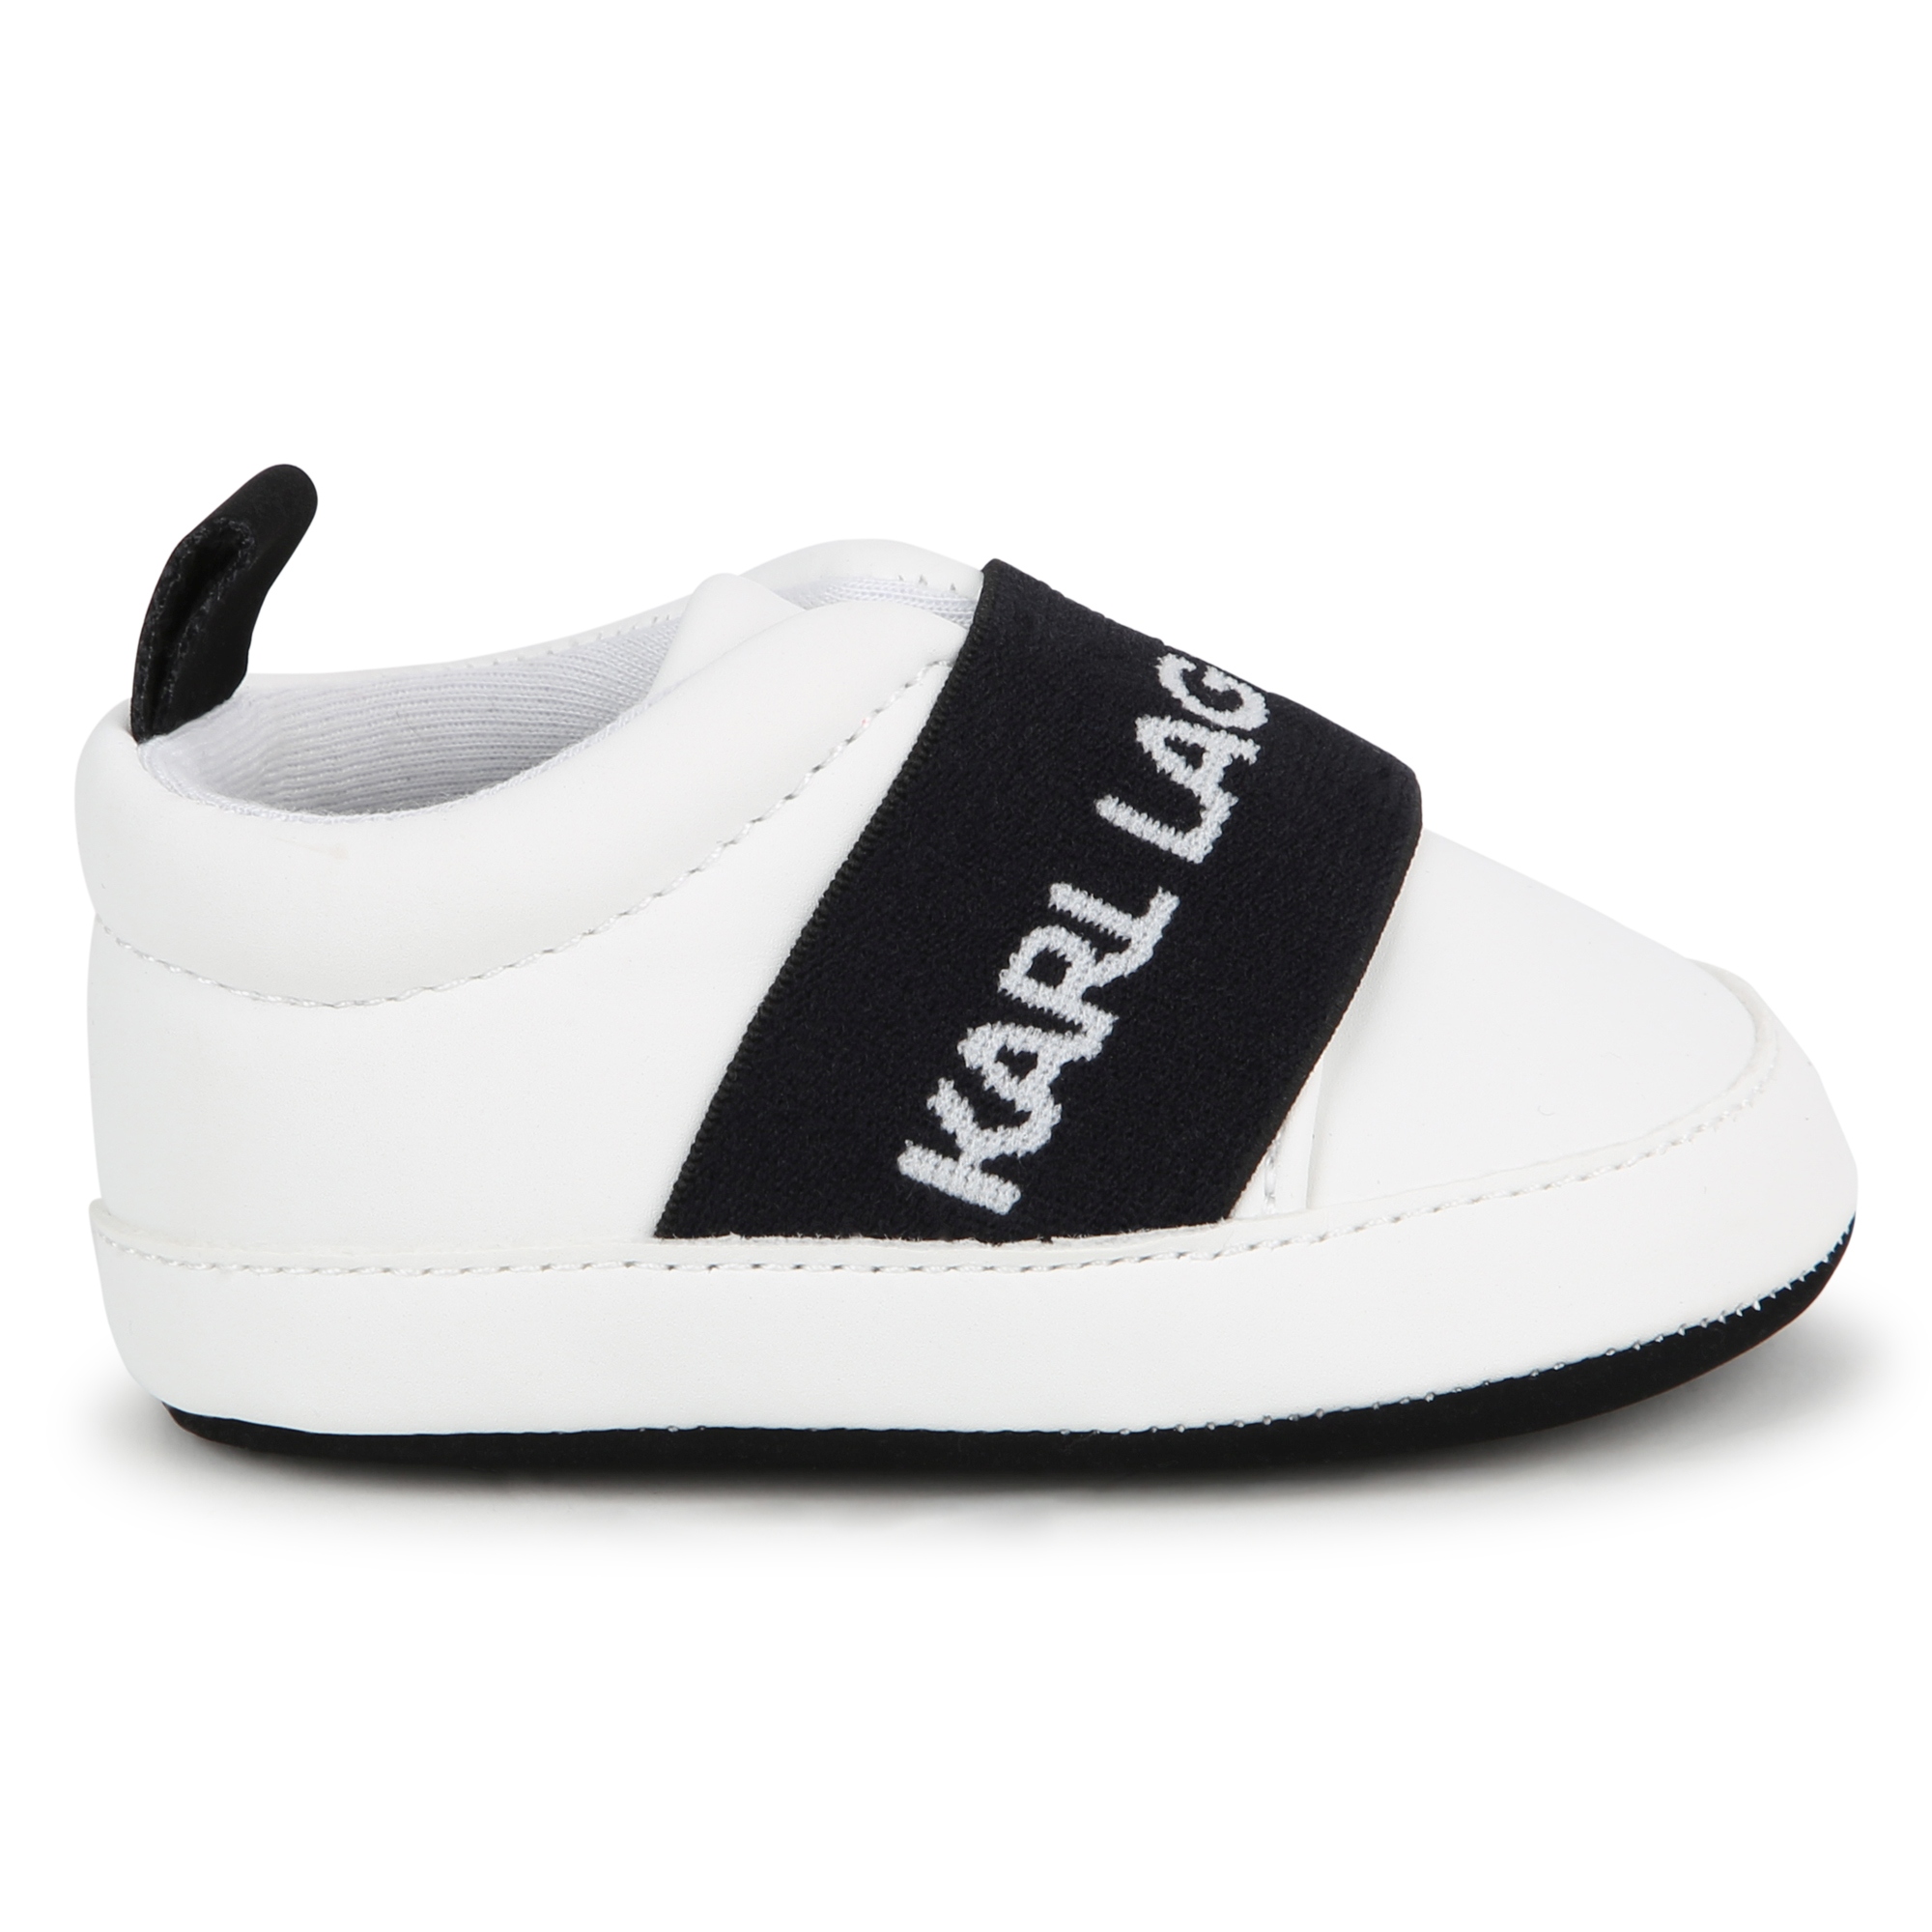 Chaussons fantaisie KARL LAGERFELD KIDS pour UNISEXE